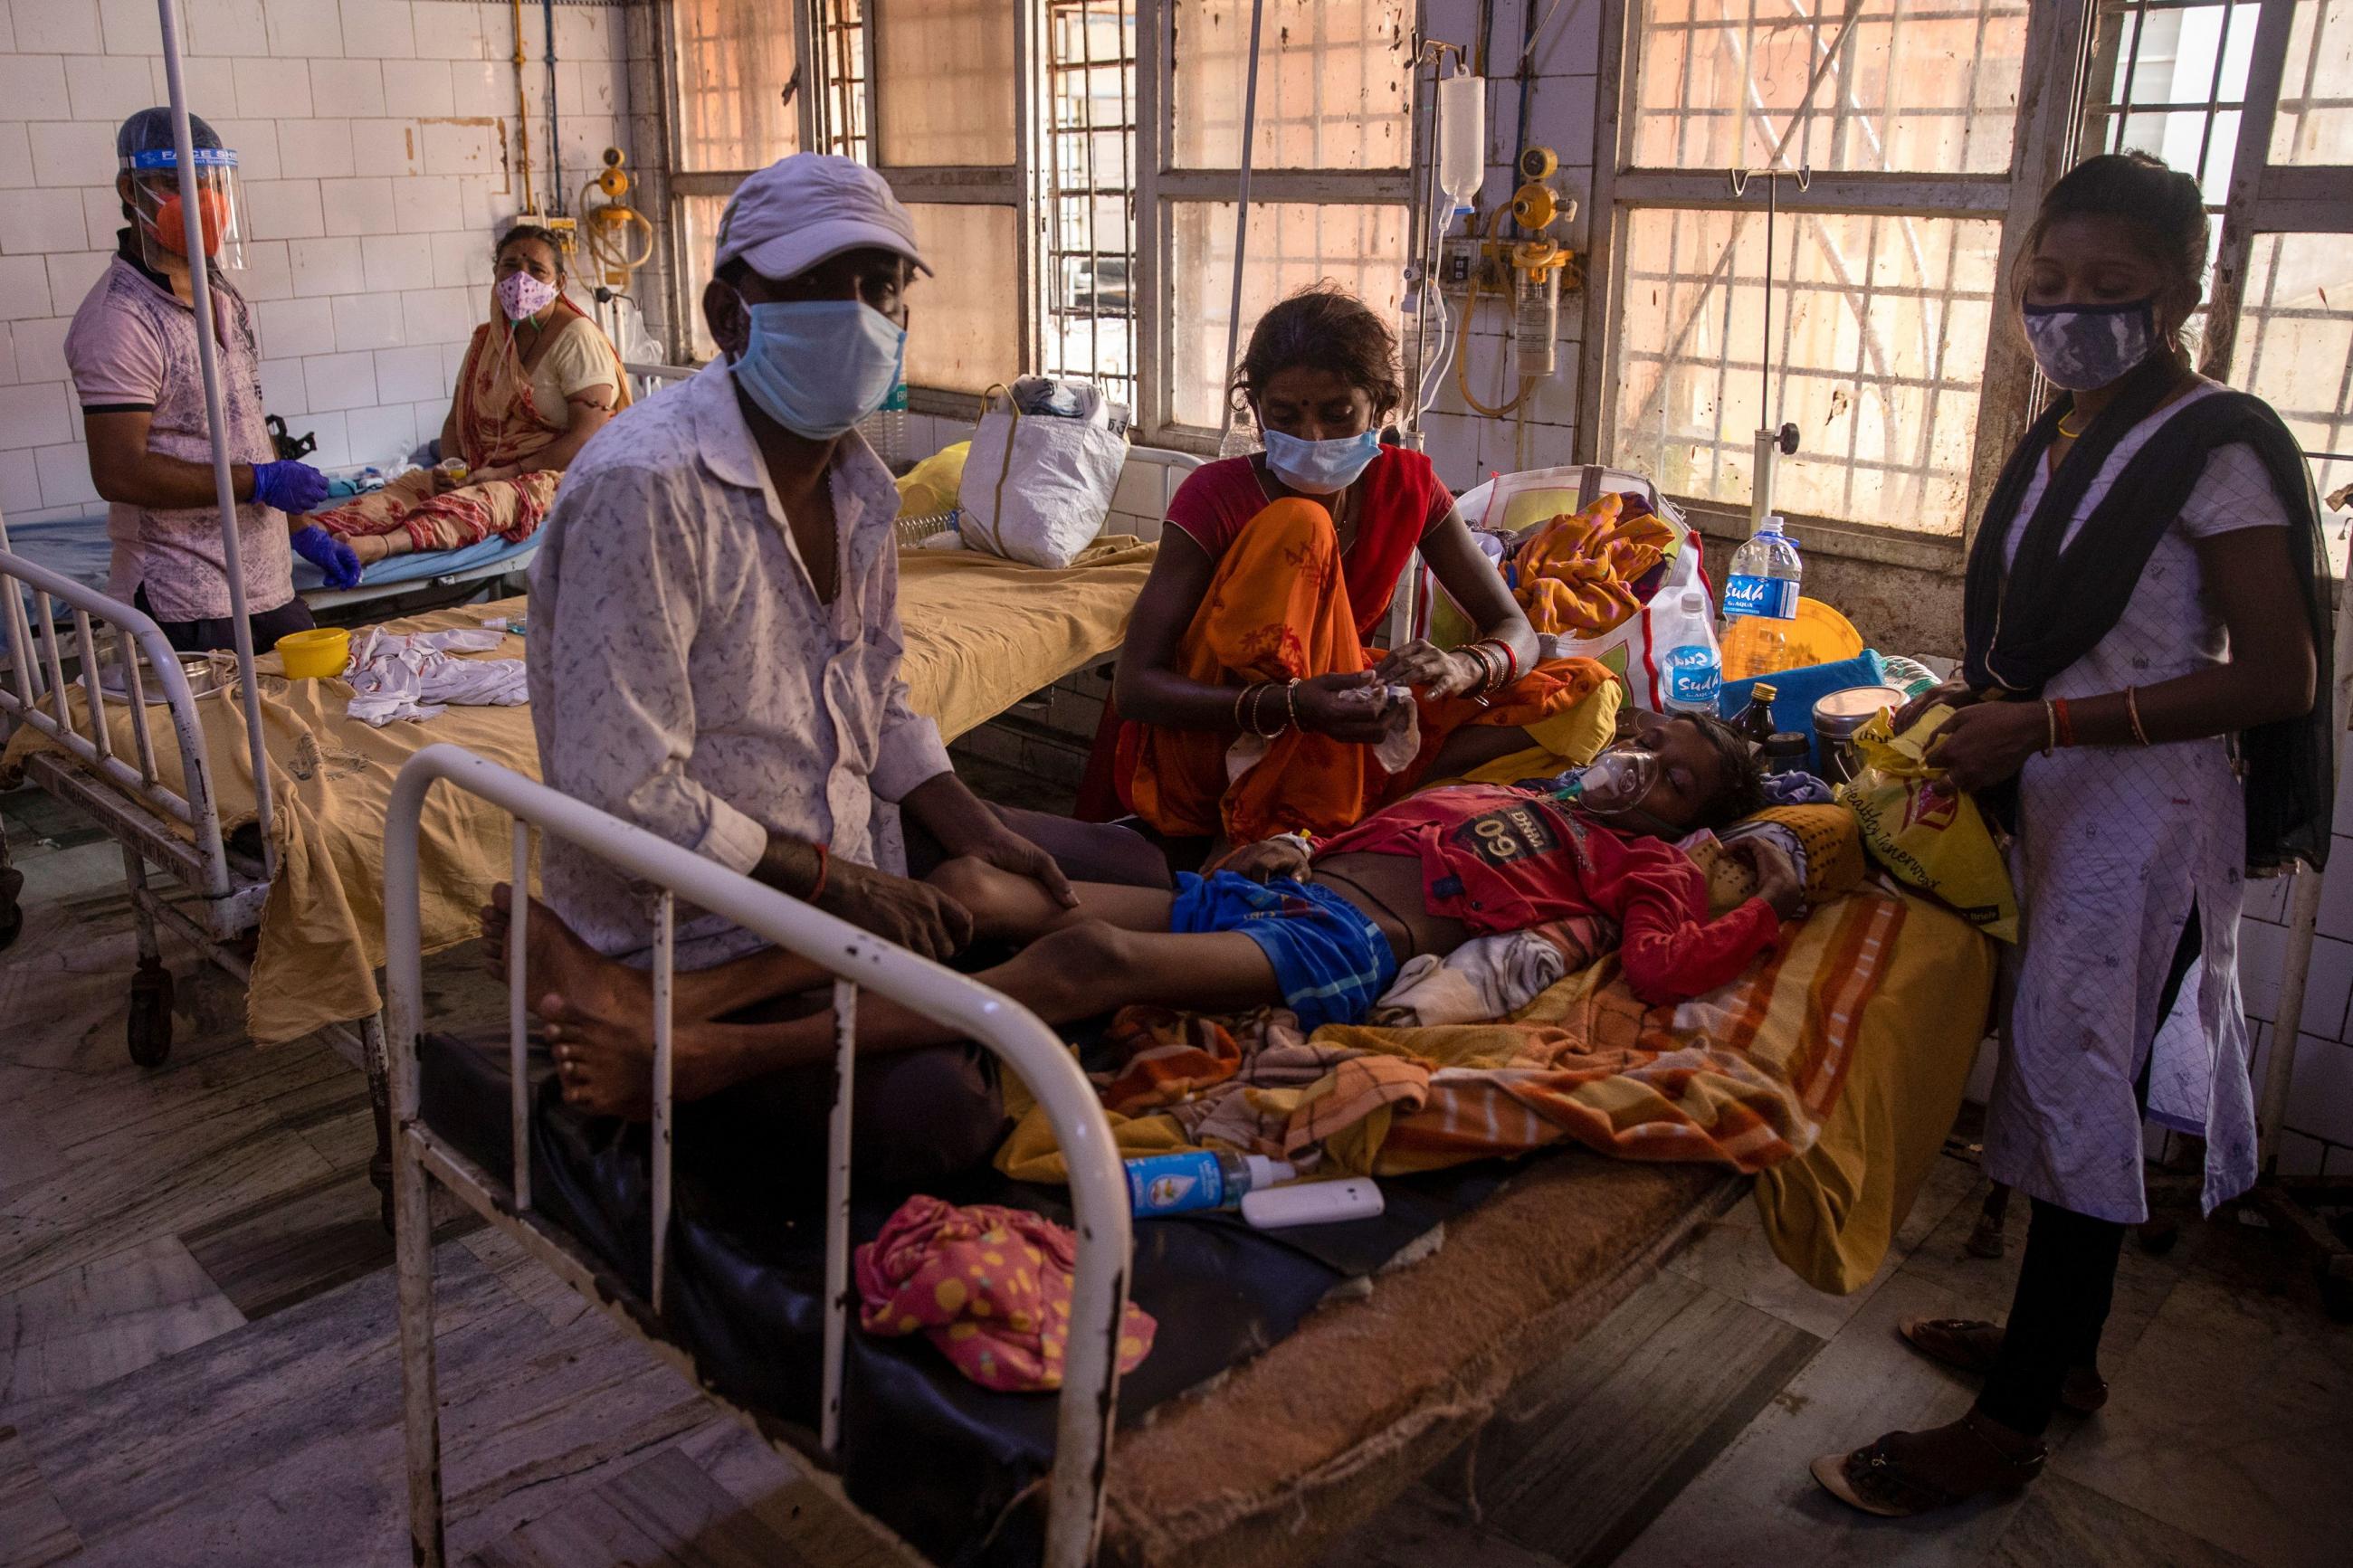 A patient suffering from diabetes lies on a hospital bed as his family look after him on the emergency ward of Jawahar Lal Nehru Medical College and Hospital, during the coronavirus disease (COVID-19) outbreak, in Bhagalpur, Bihar, India, July 26, 2020.